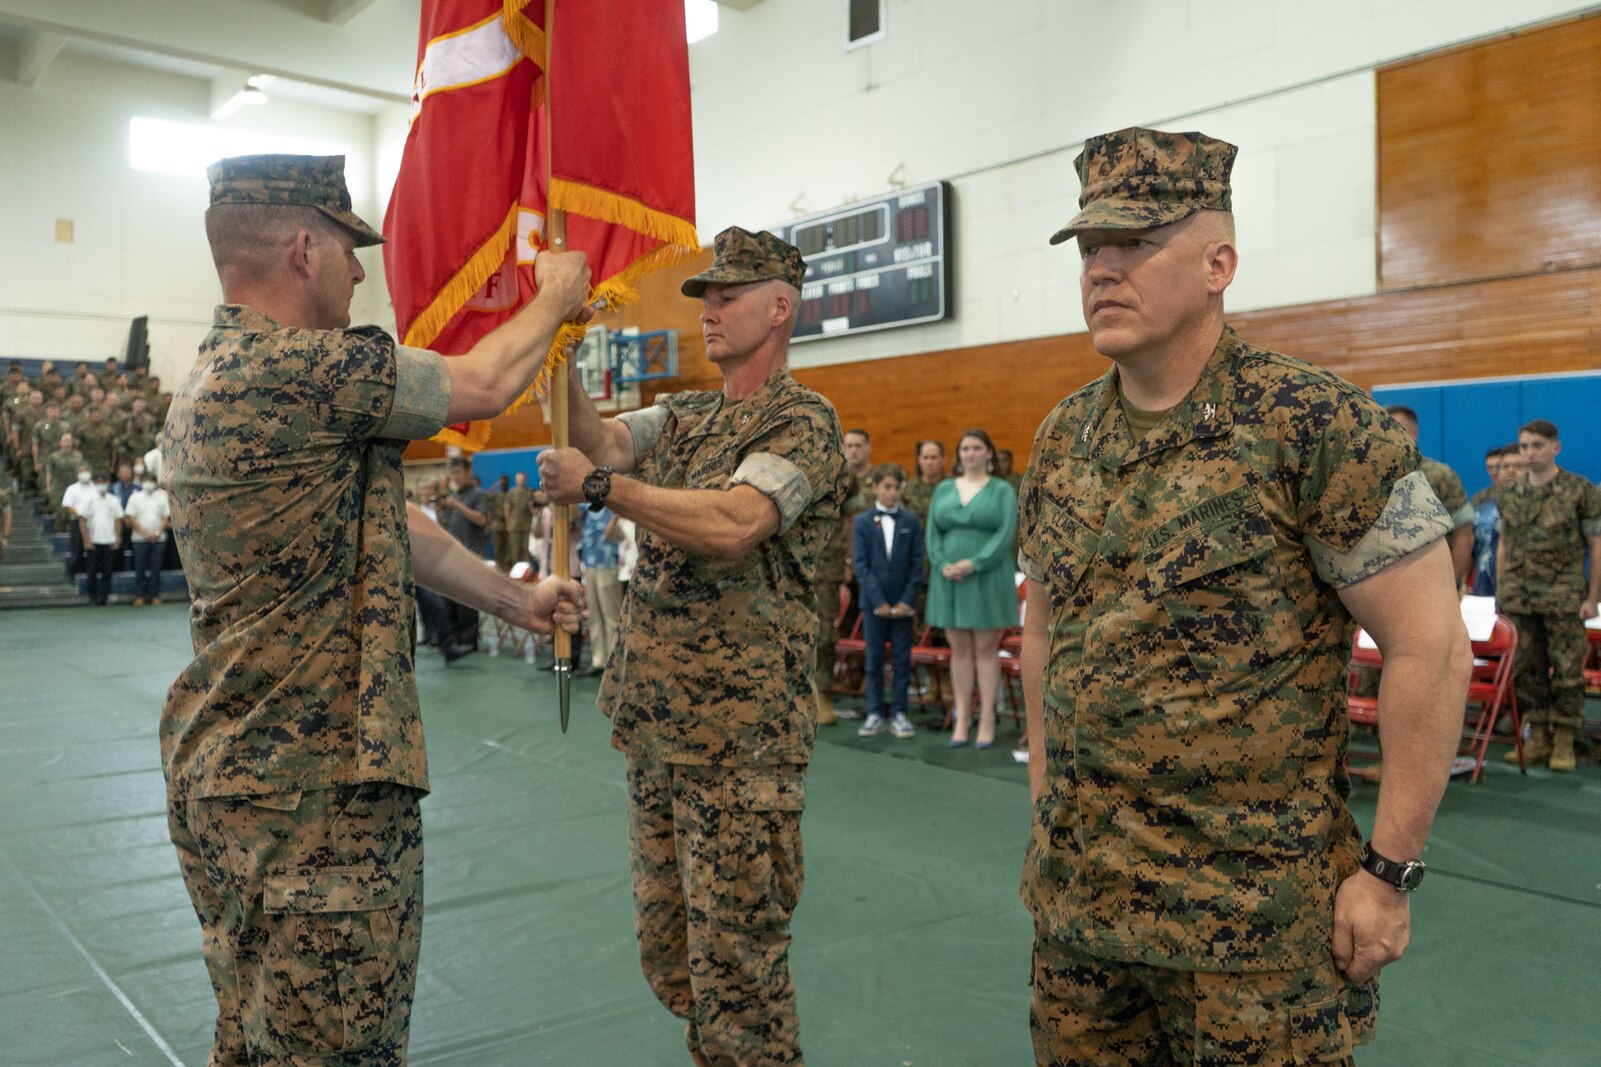 U.S. Marine Corps Col. Matthew Tracy, center, the outgoing commanding officer of 4th Marines, 3d Marine Division, receives the colors from Sgt. Maj. Christopher Singley, left, 4th Marines sergeant major, during a change of command ceremony on Camp Schwab, Okinawa, Japan, June 3, 2022.